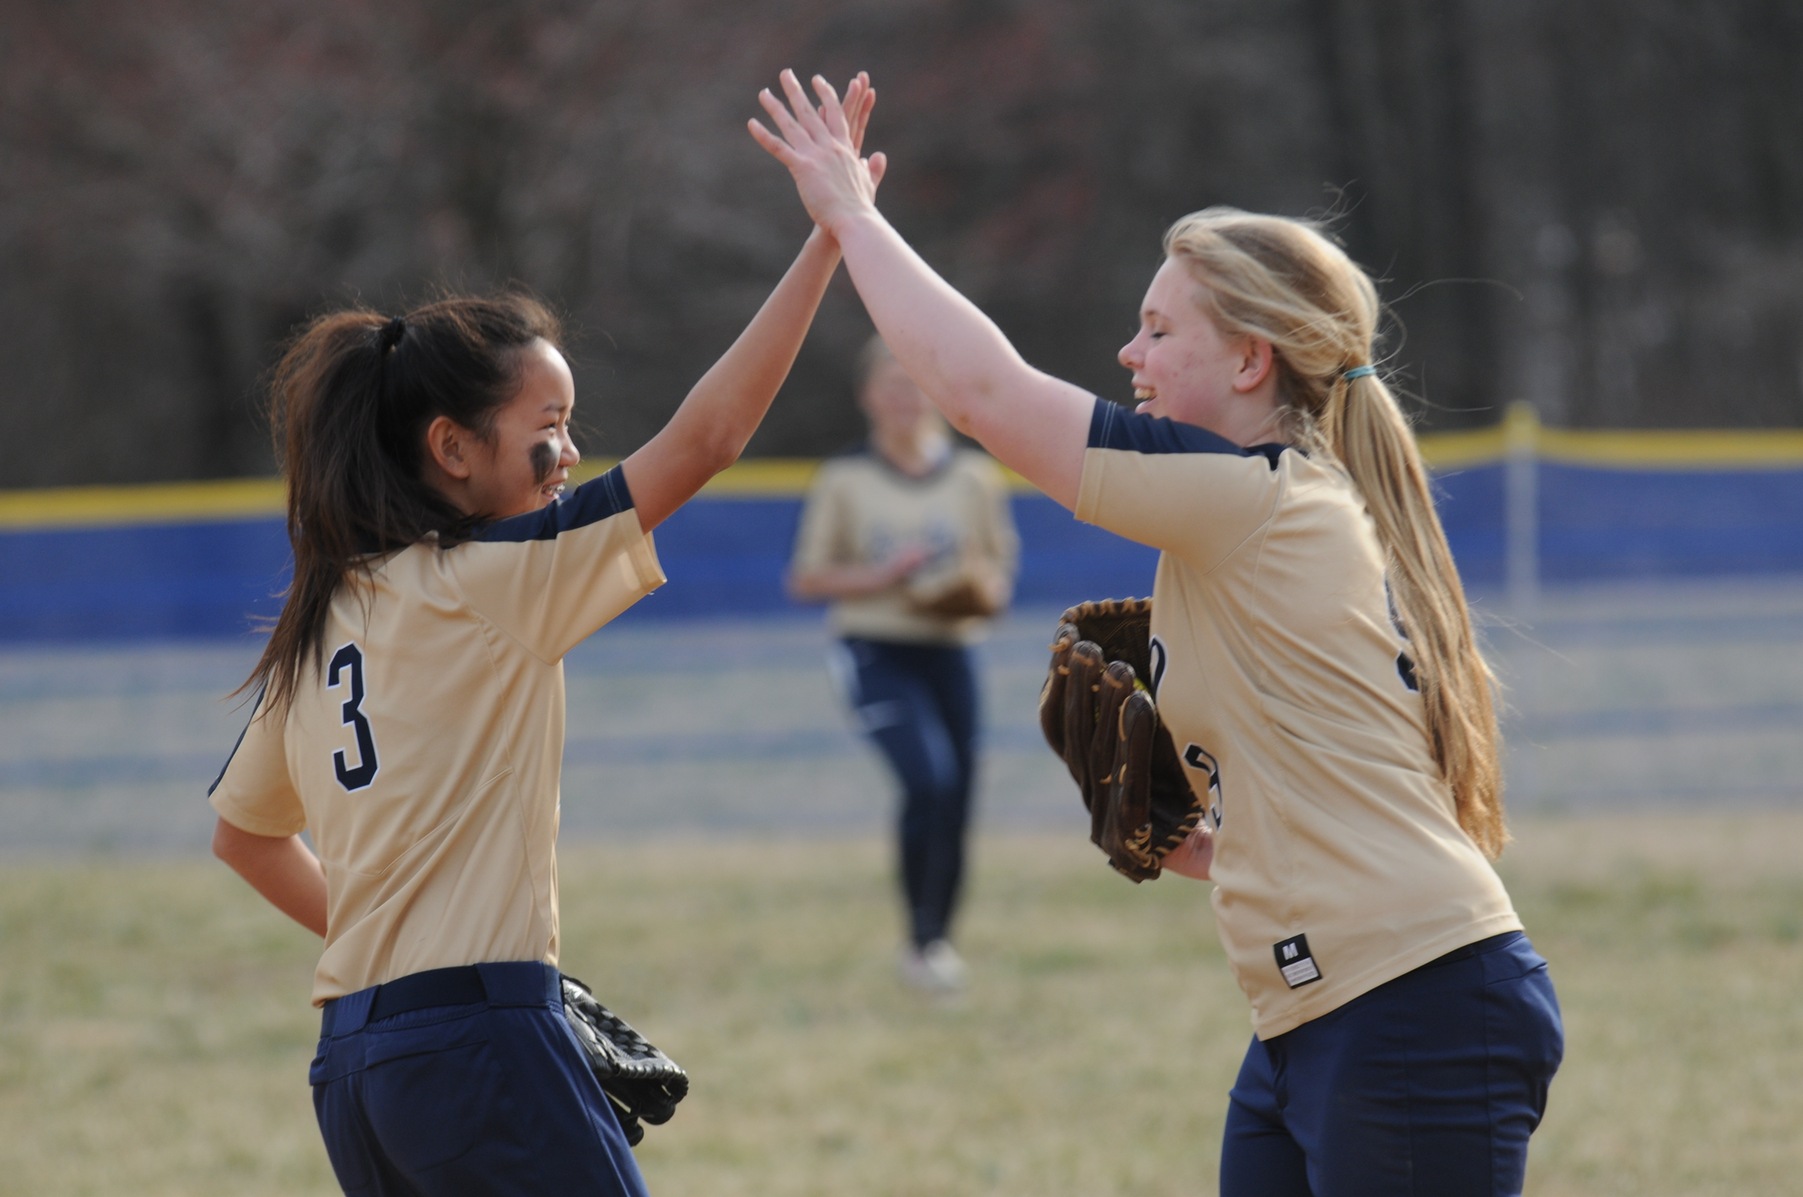 Wilson's No Hitter Leads AACS Over Roland Park